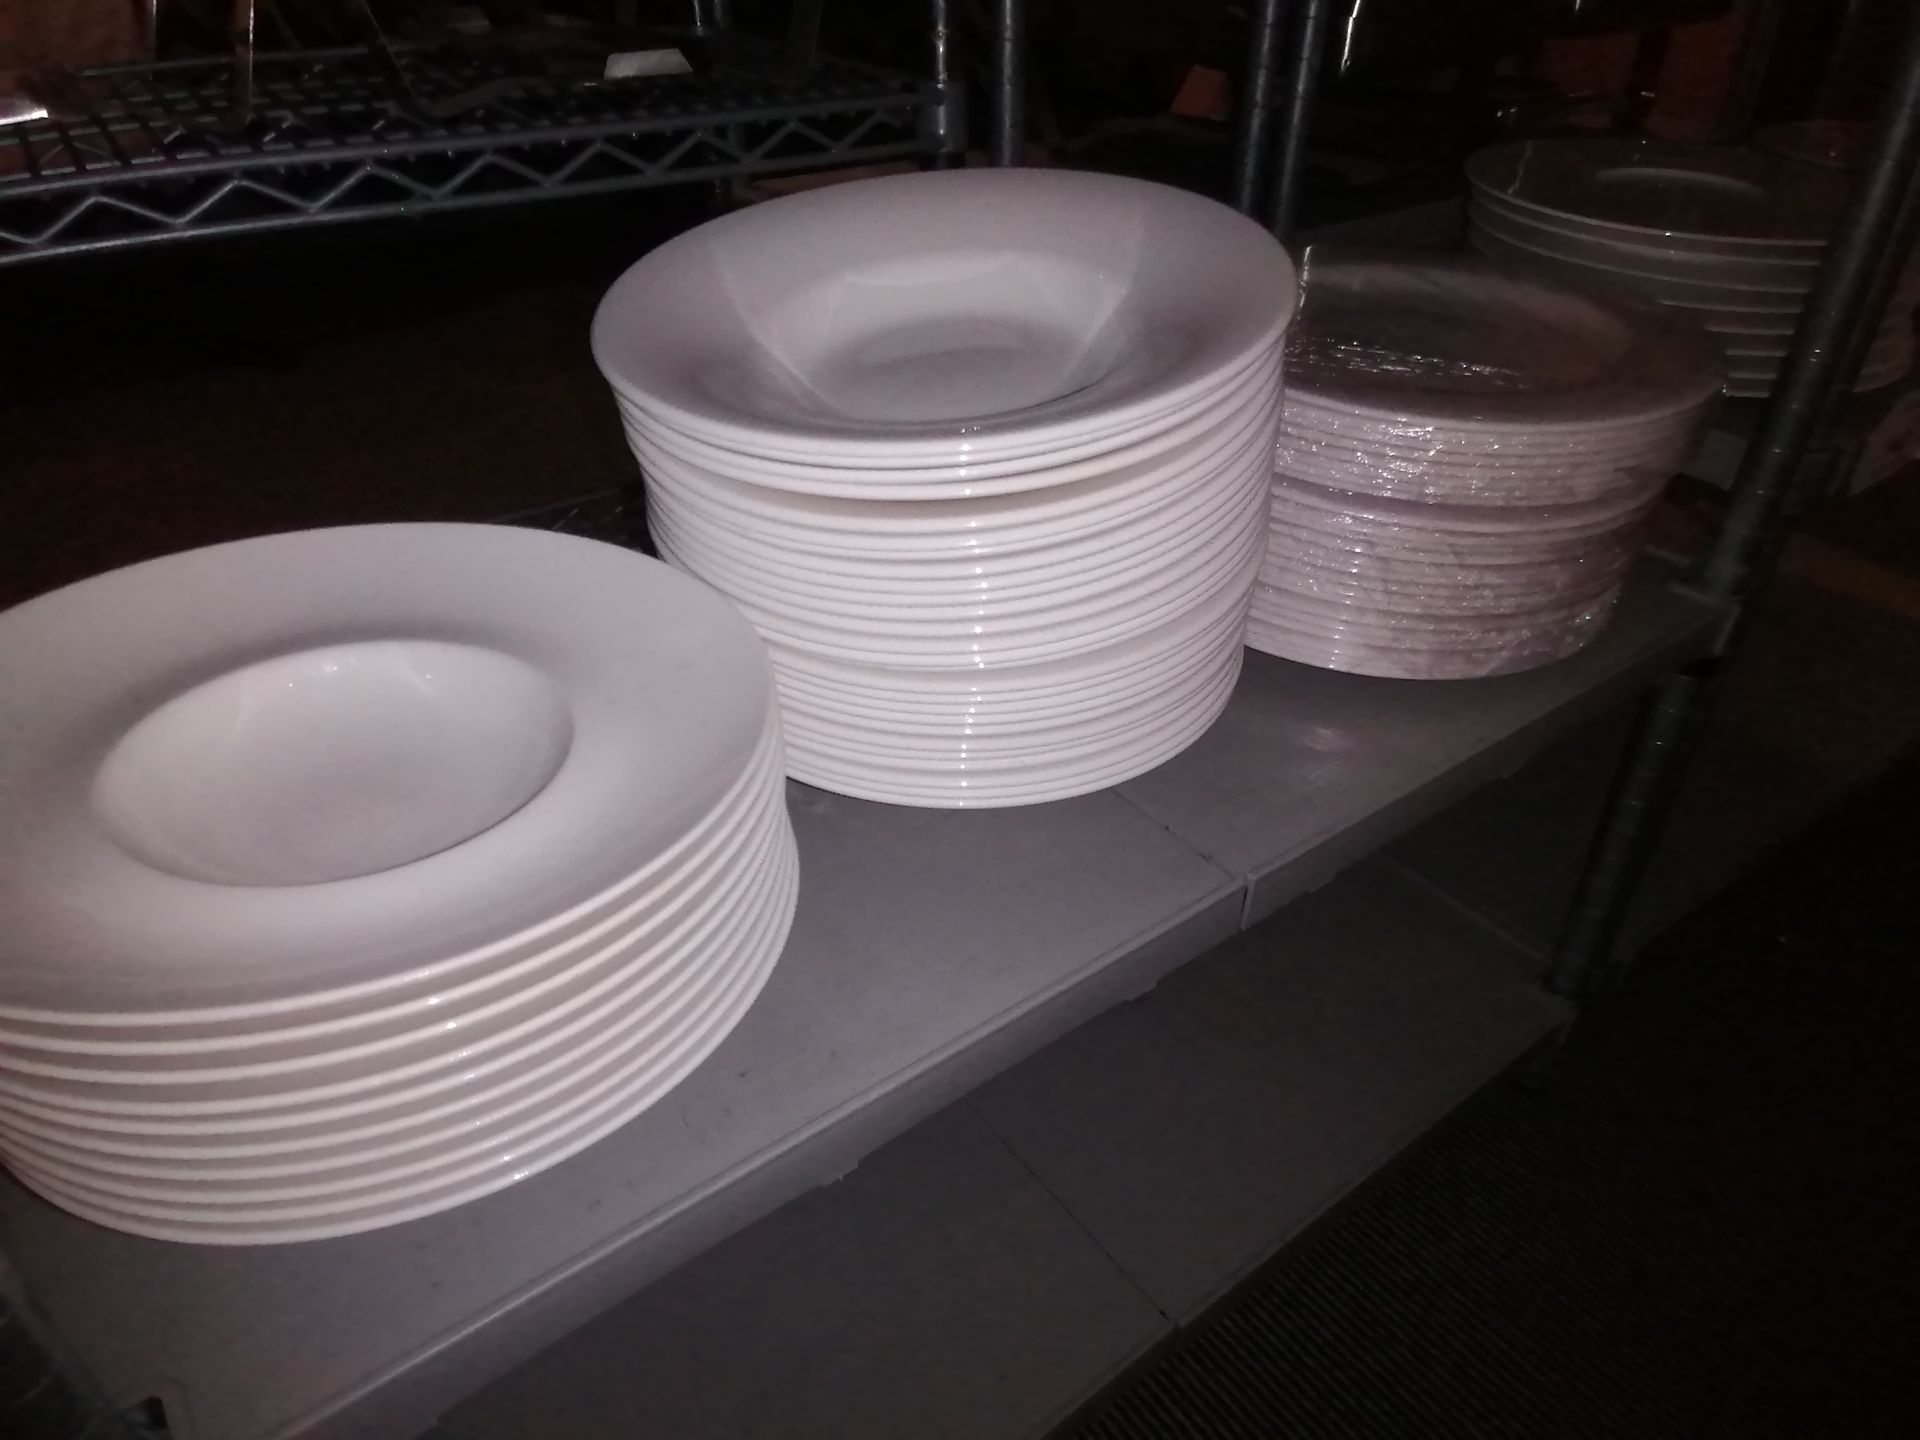 Approximately 95 plates and bowls from Villeroy & - Image 3 of 6